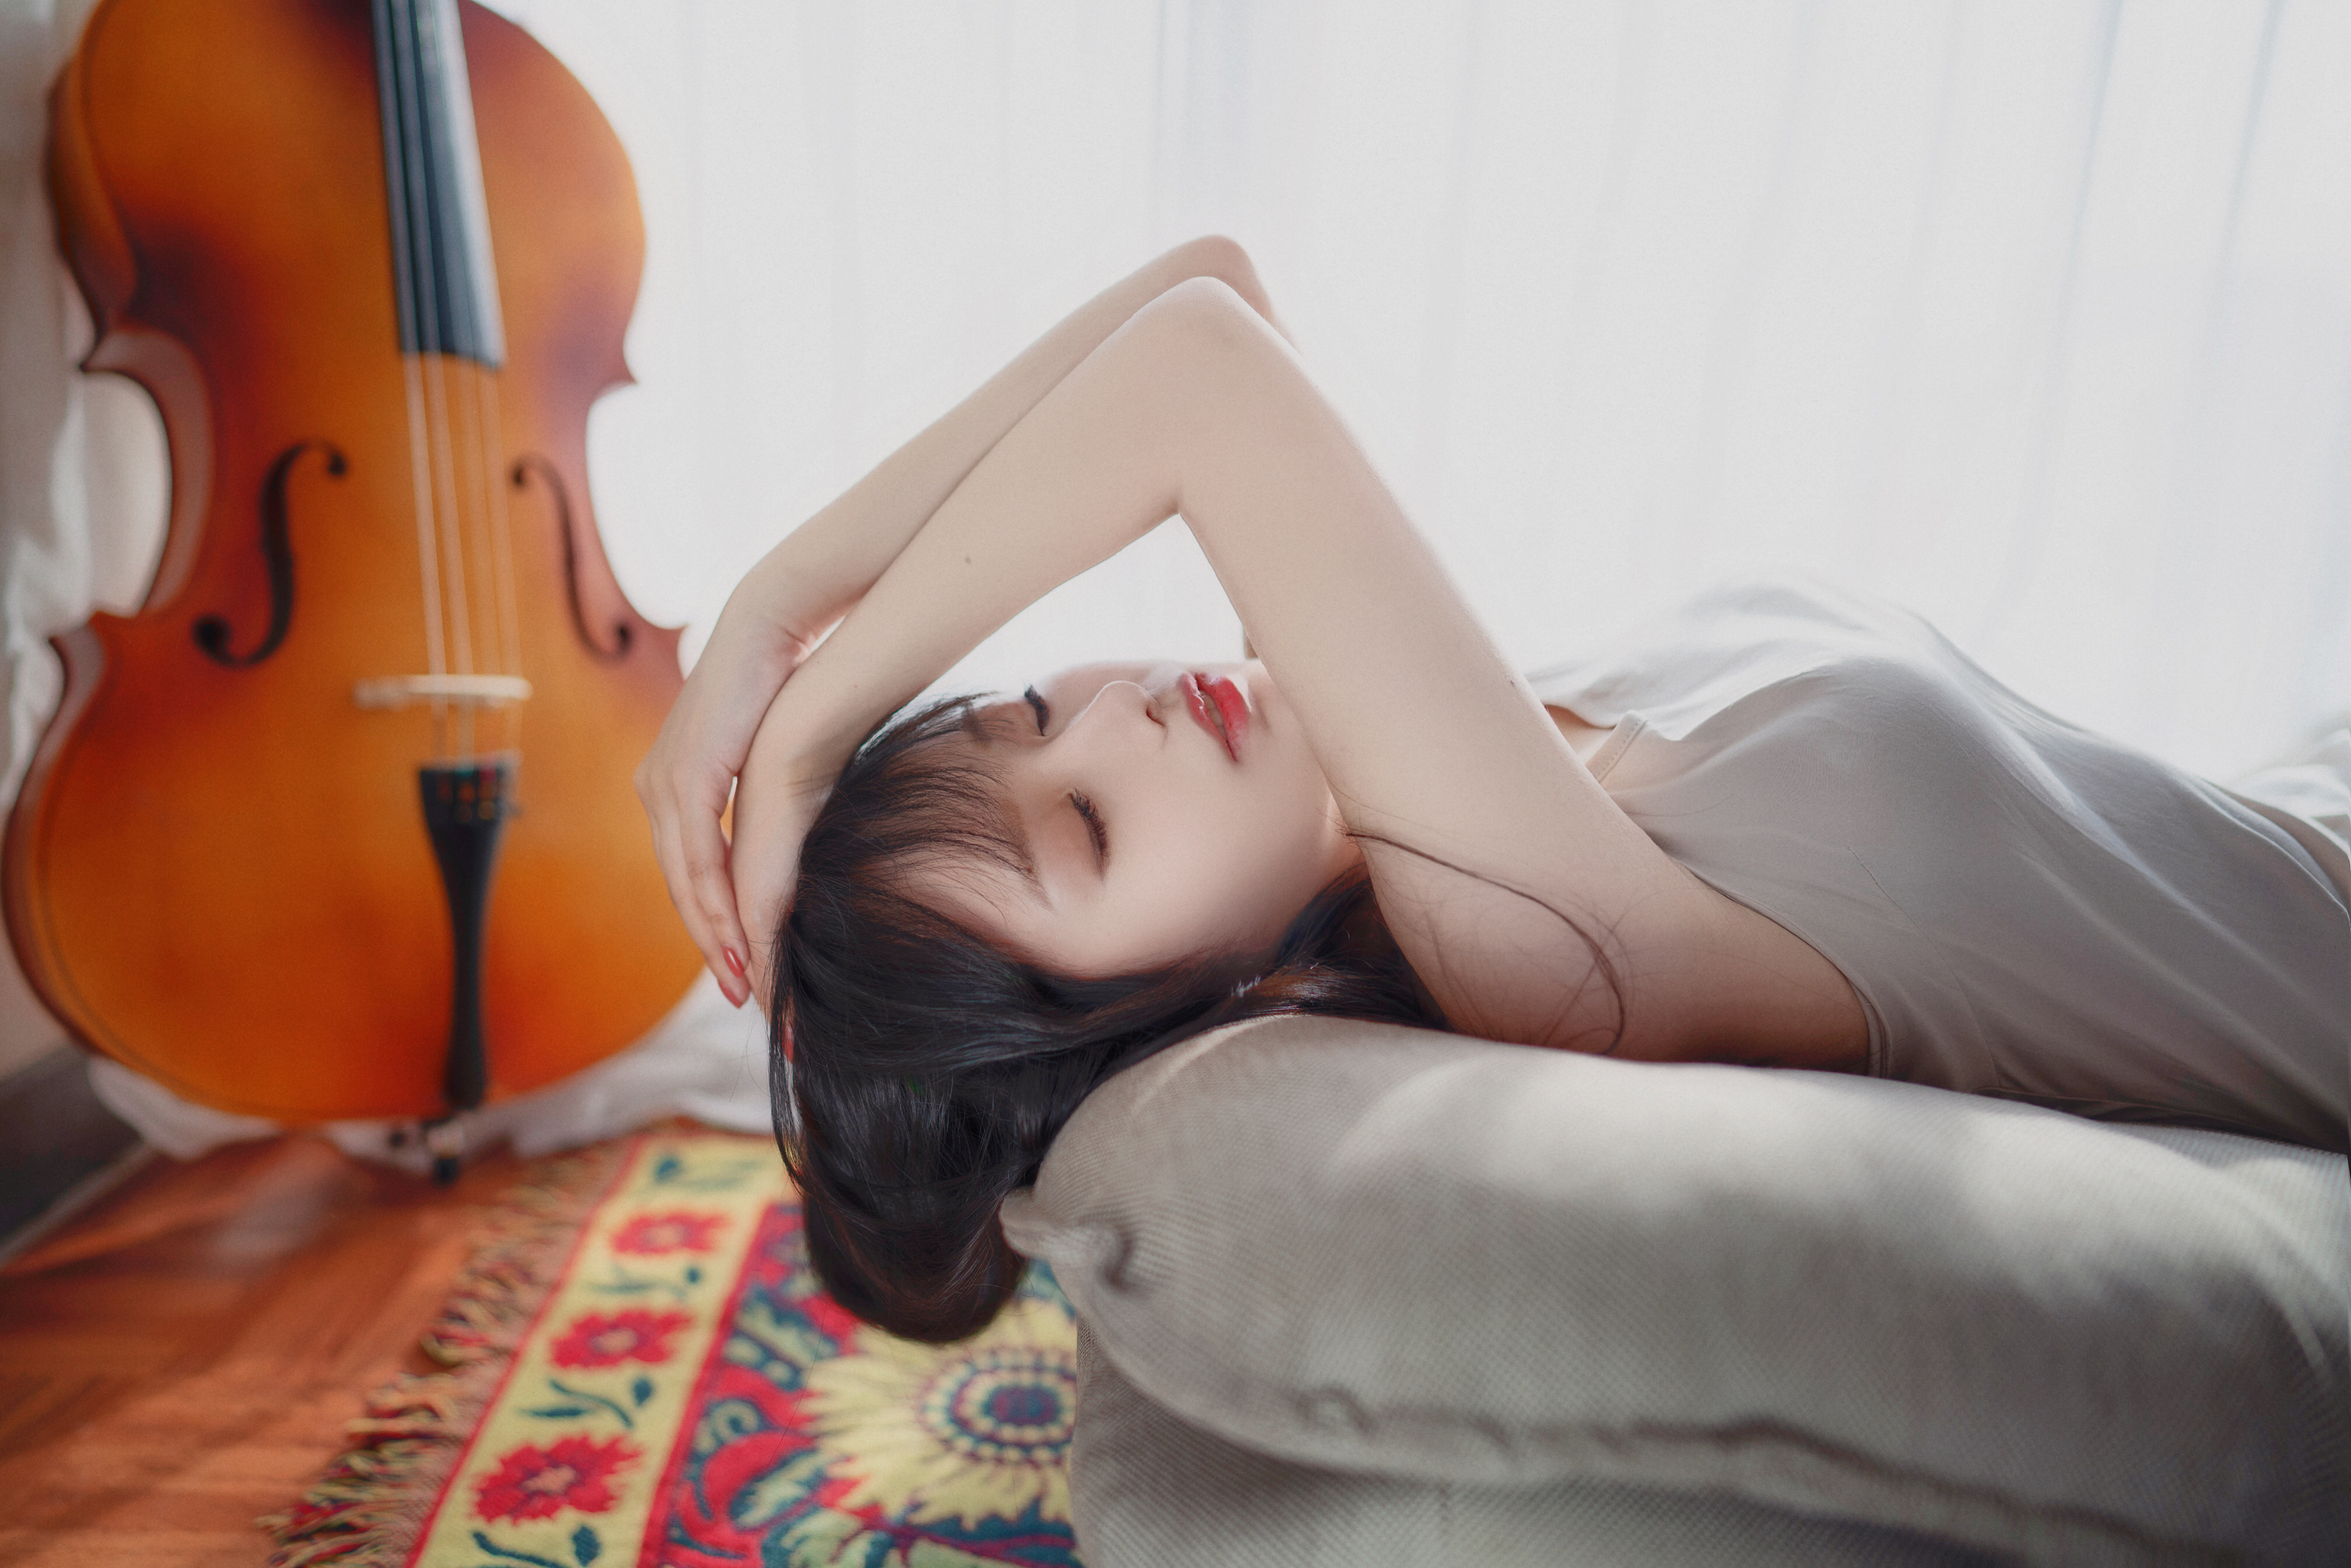 Asian Women Indoors Women Indoors Cello Brunette Lying Down Closed Eyes Bed 4032x2690